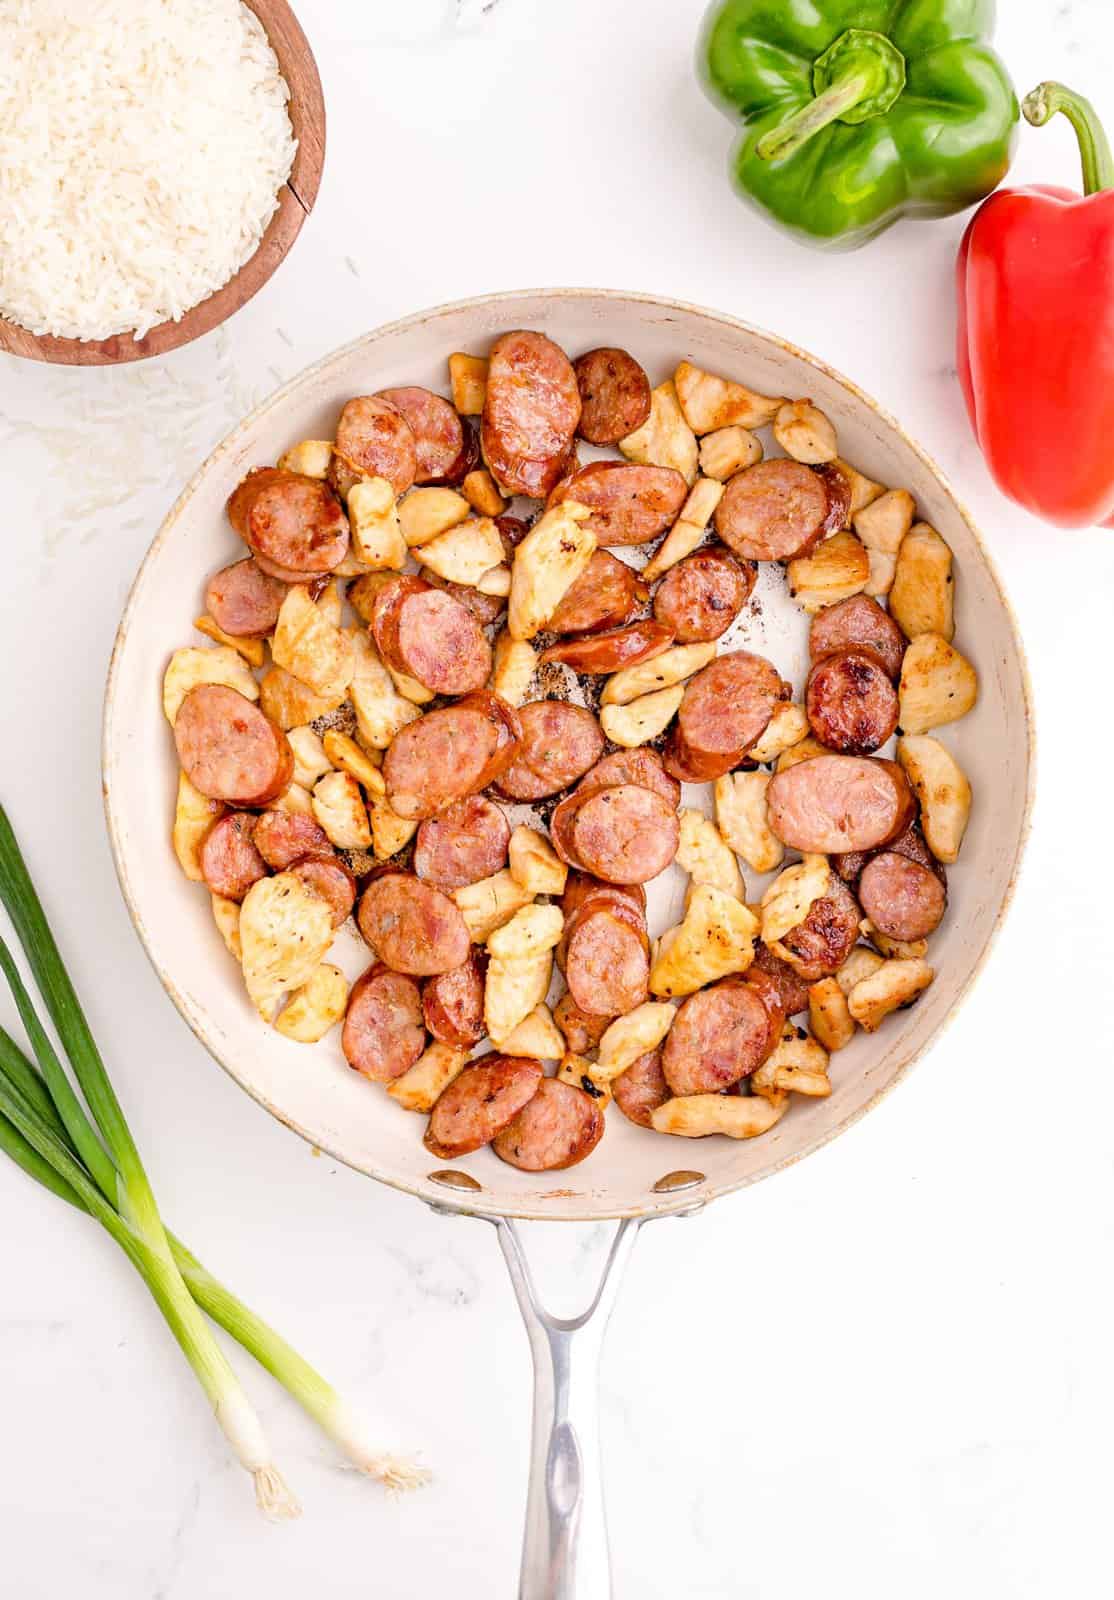 Chicken and sausage browned in pan.